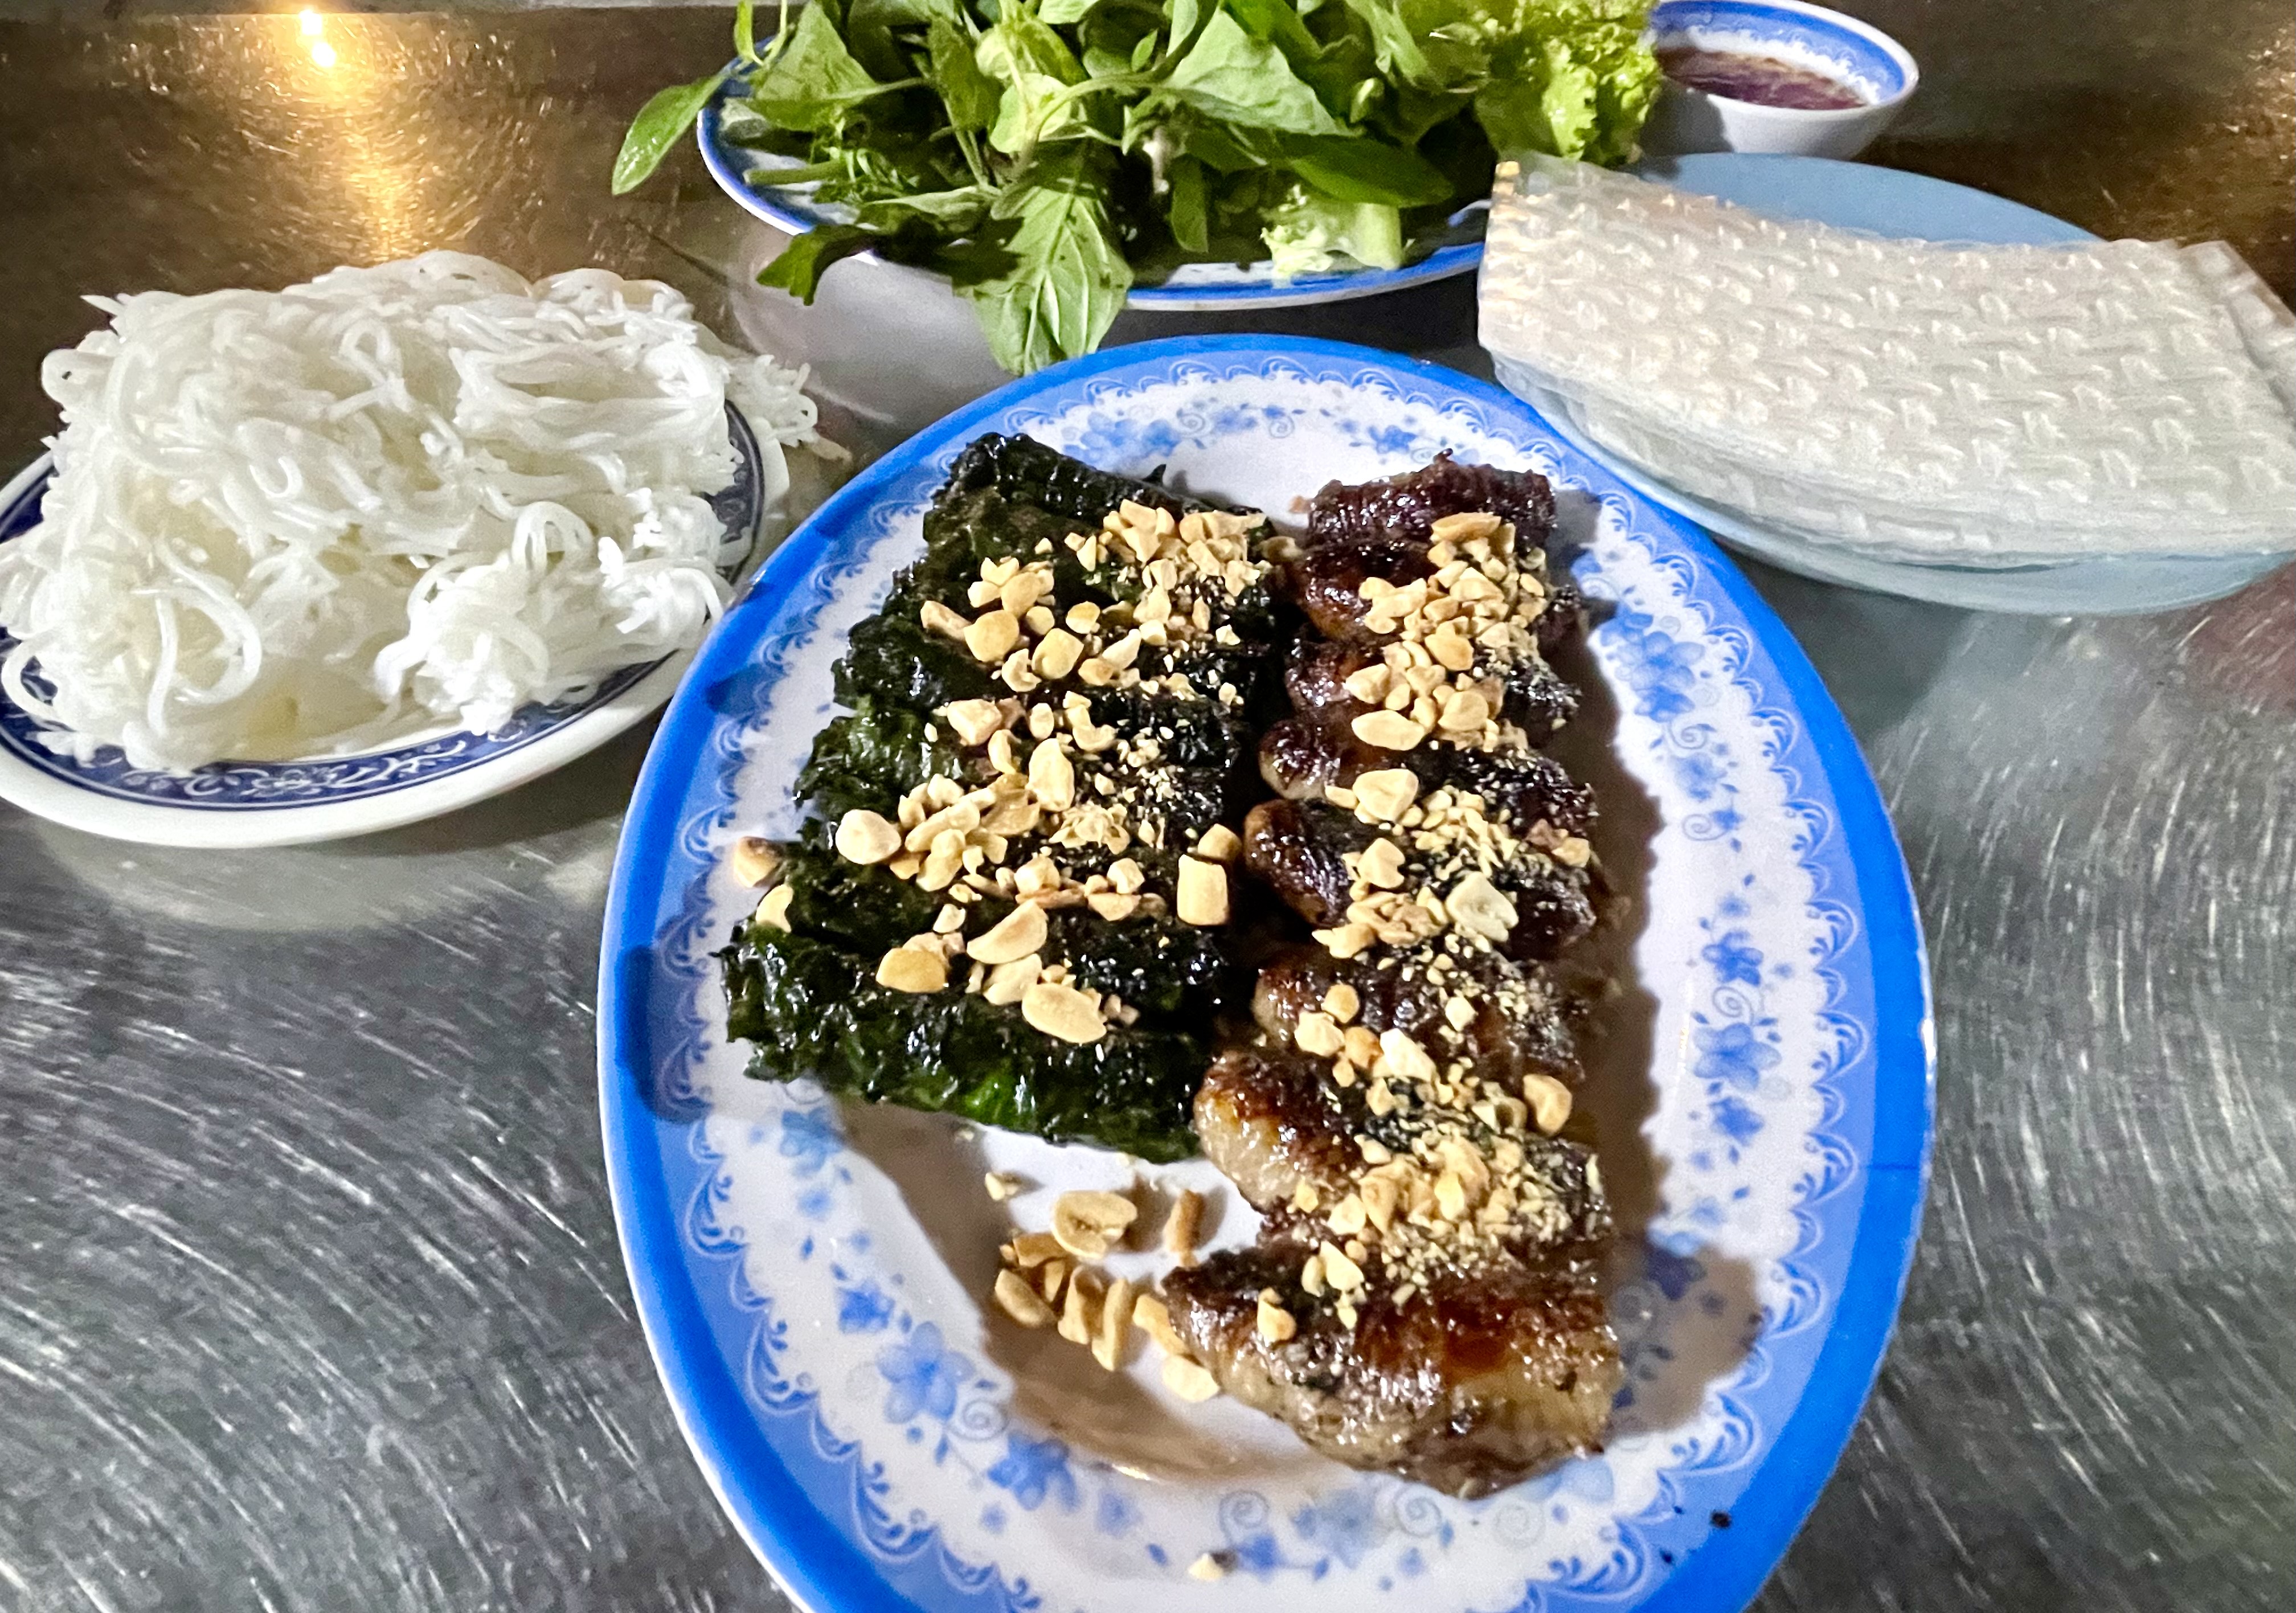 Two types of Vietnamese grilled beef rolls called 'bò nướng lá lốt' and 'bò nướng mỡ chài' are served with noodles, rice paper, and vegetables. Photo: Jordy Comes Alive